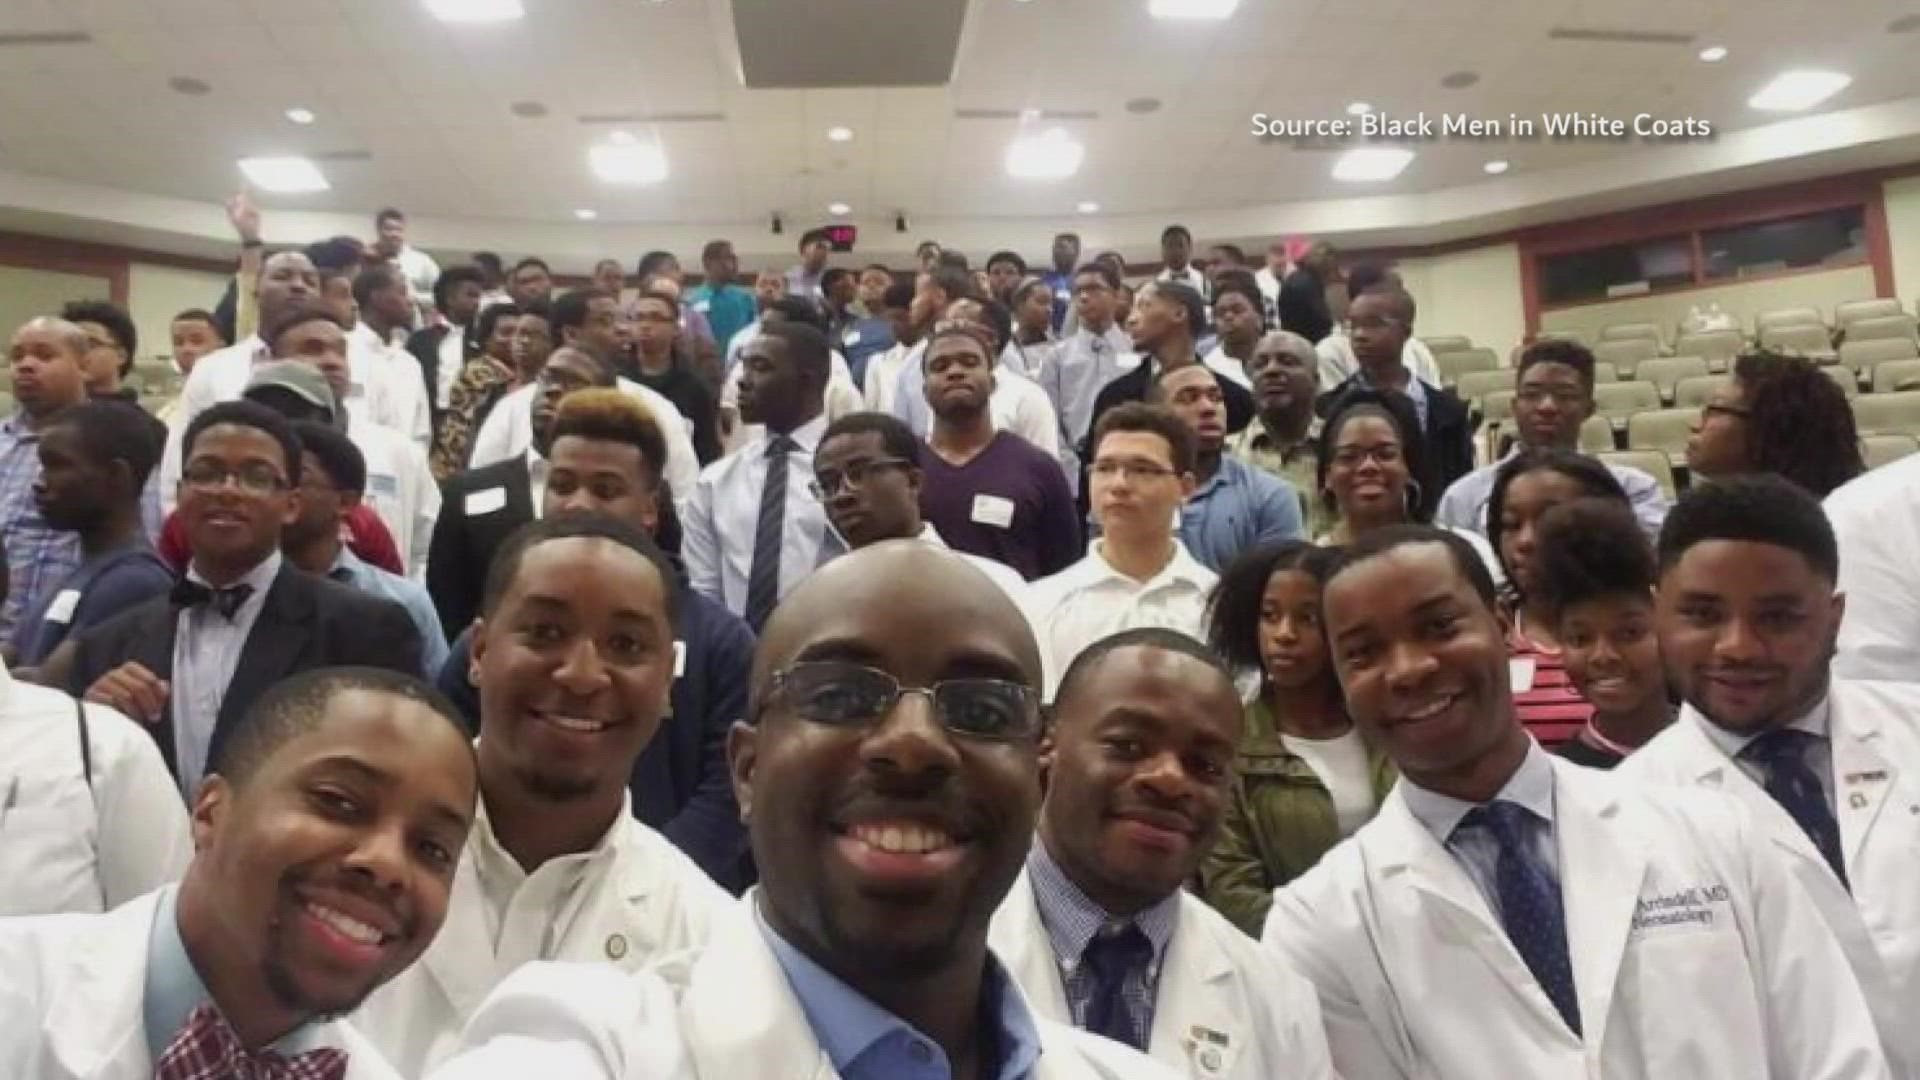 The Black Men In White Coats summit in Greensboro will introduce hundreds of minority students across the Triad to future careers in health care.